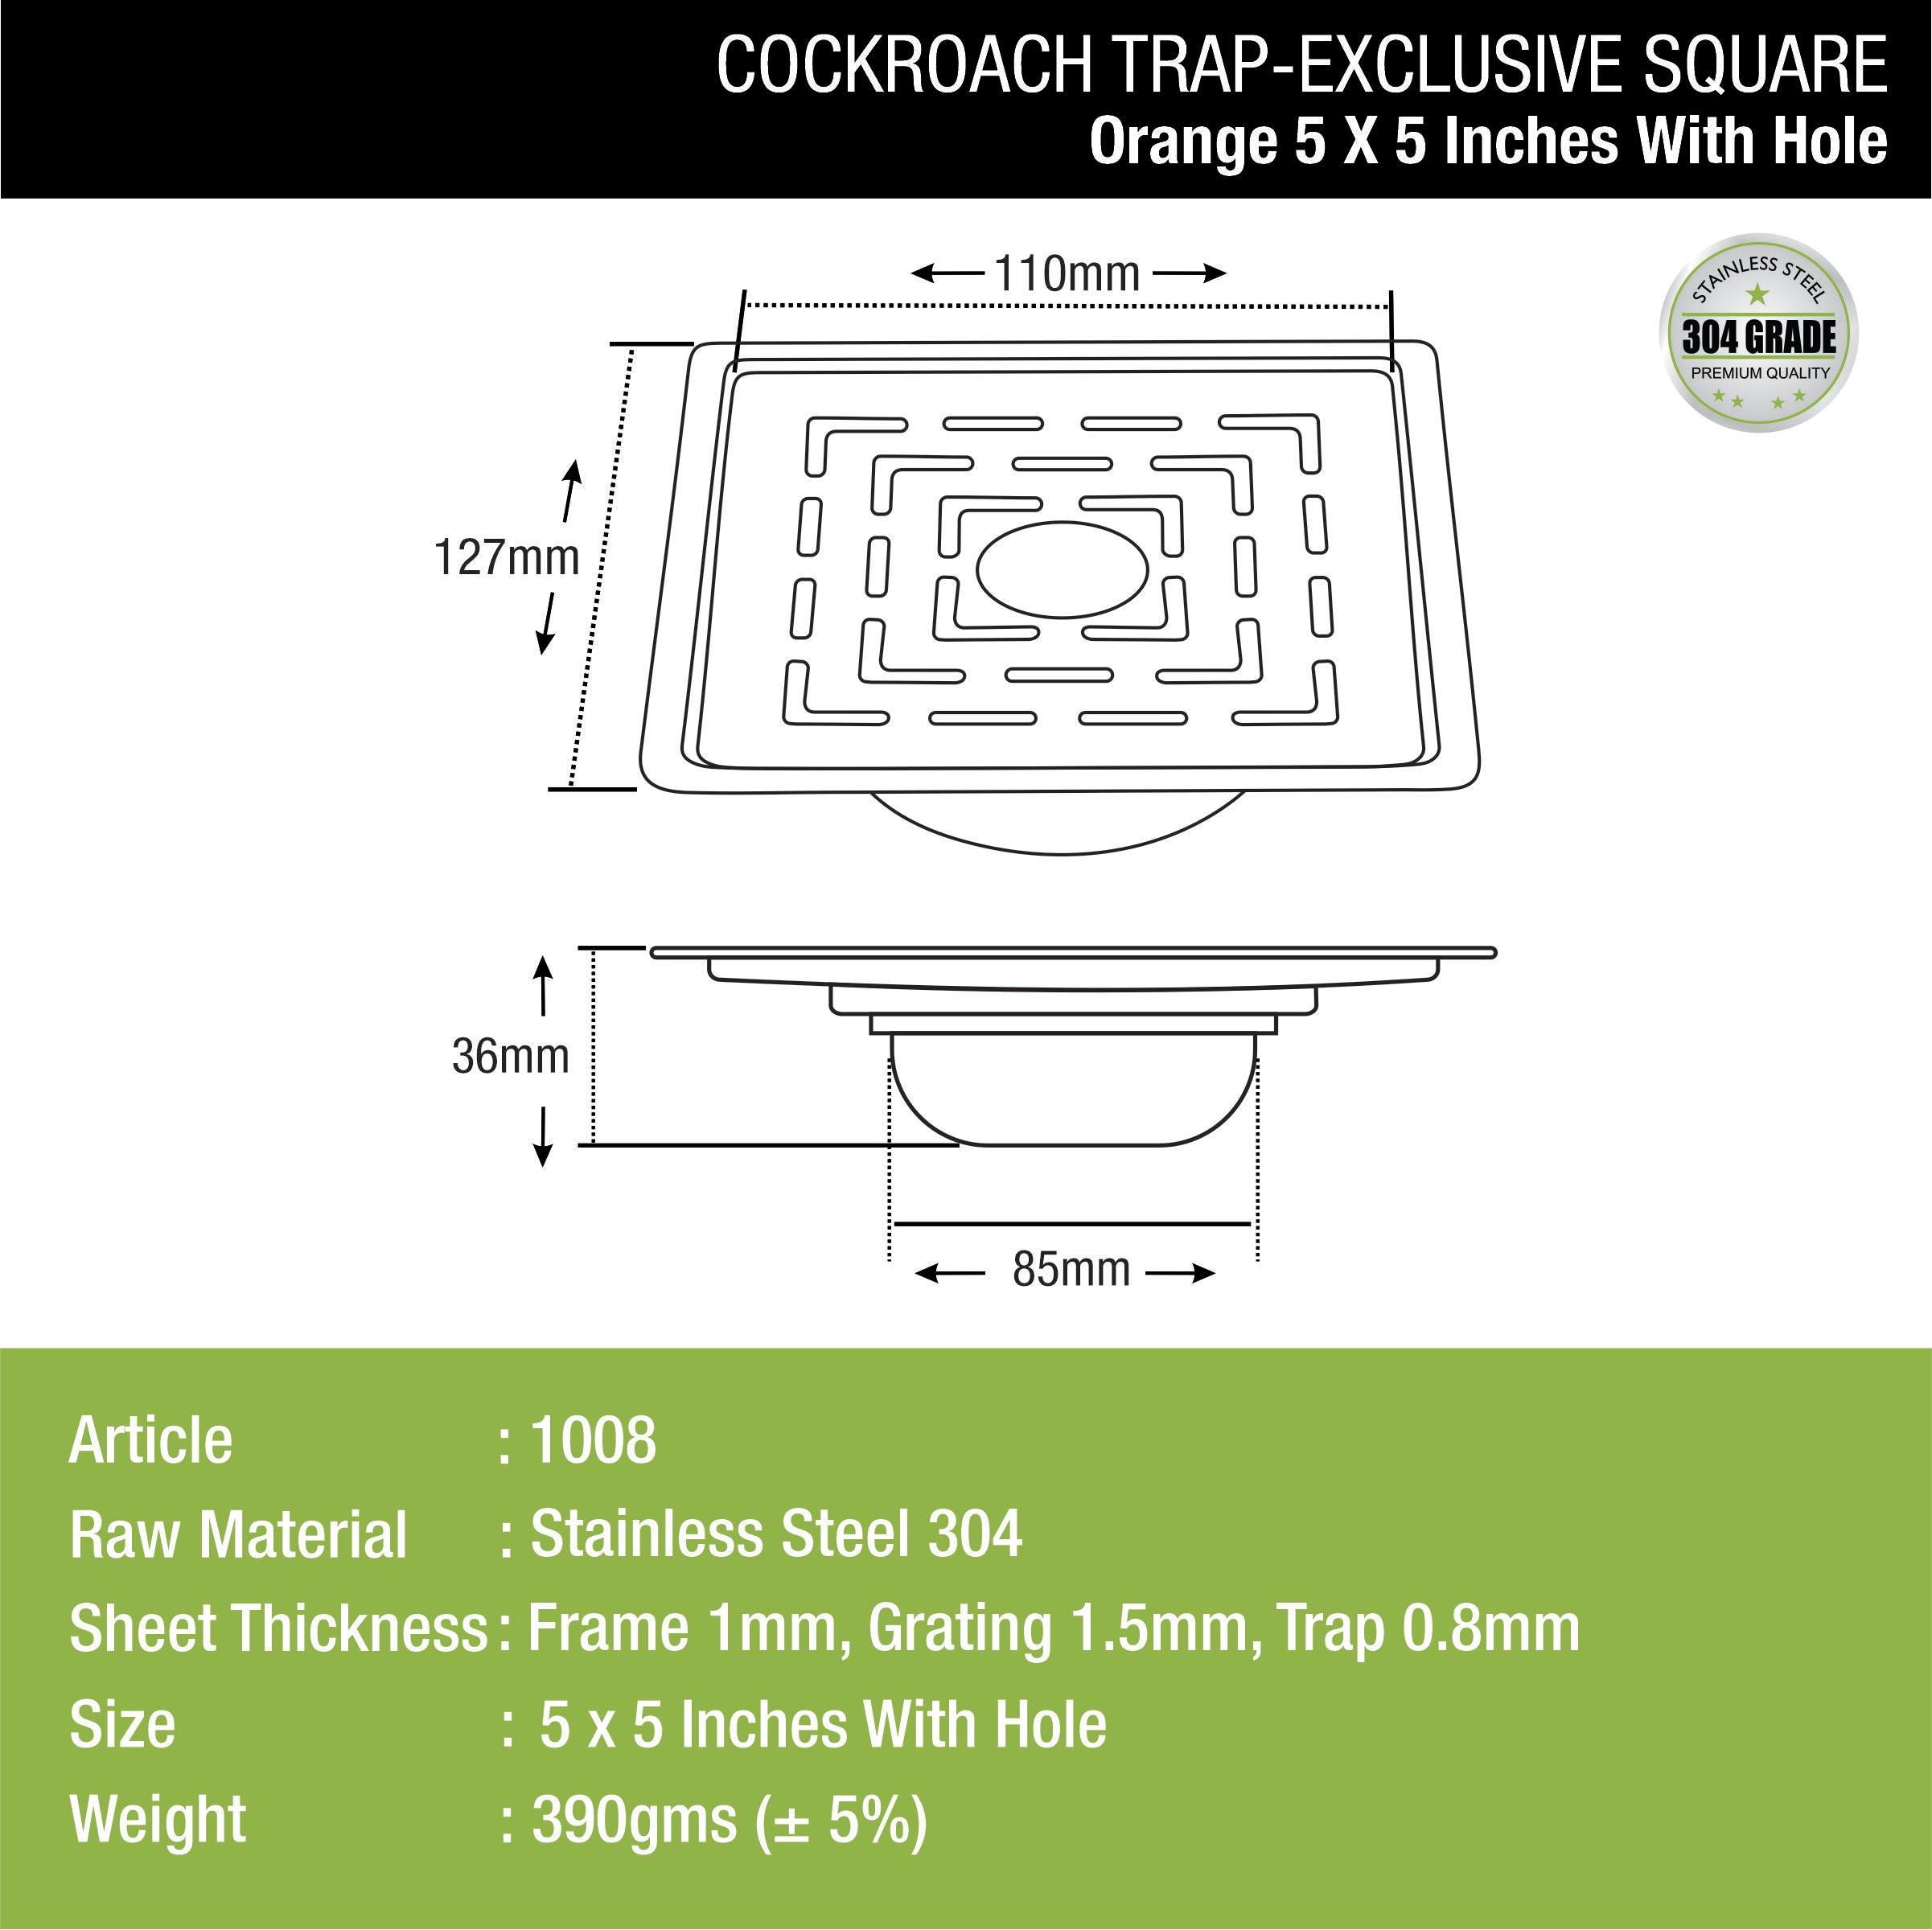 Orange Exclusive Square Floor Drain (5 x 5 Inches) with Hole and Cockroach Trap dimensions and sizes